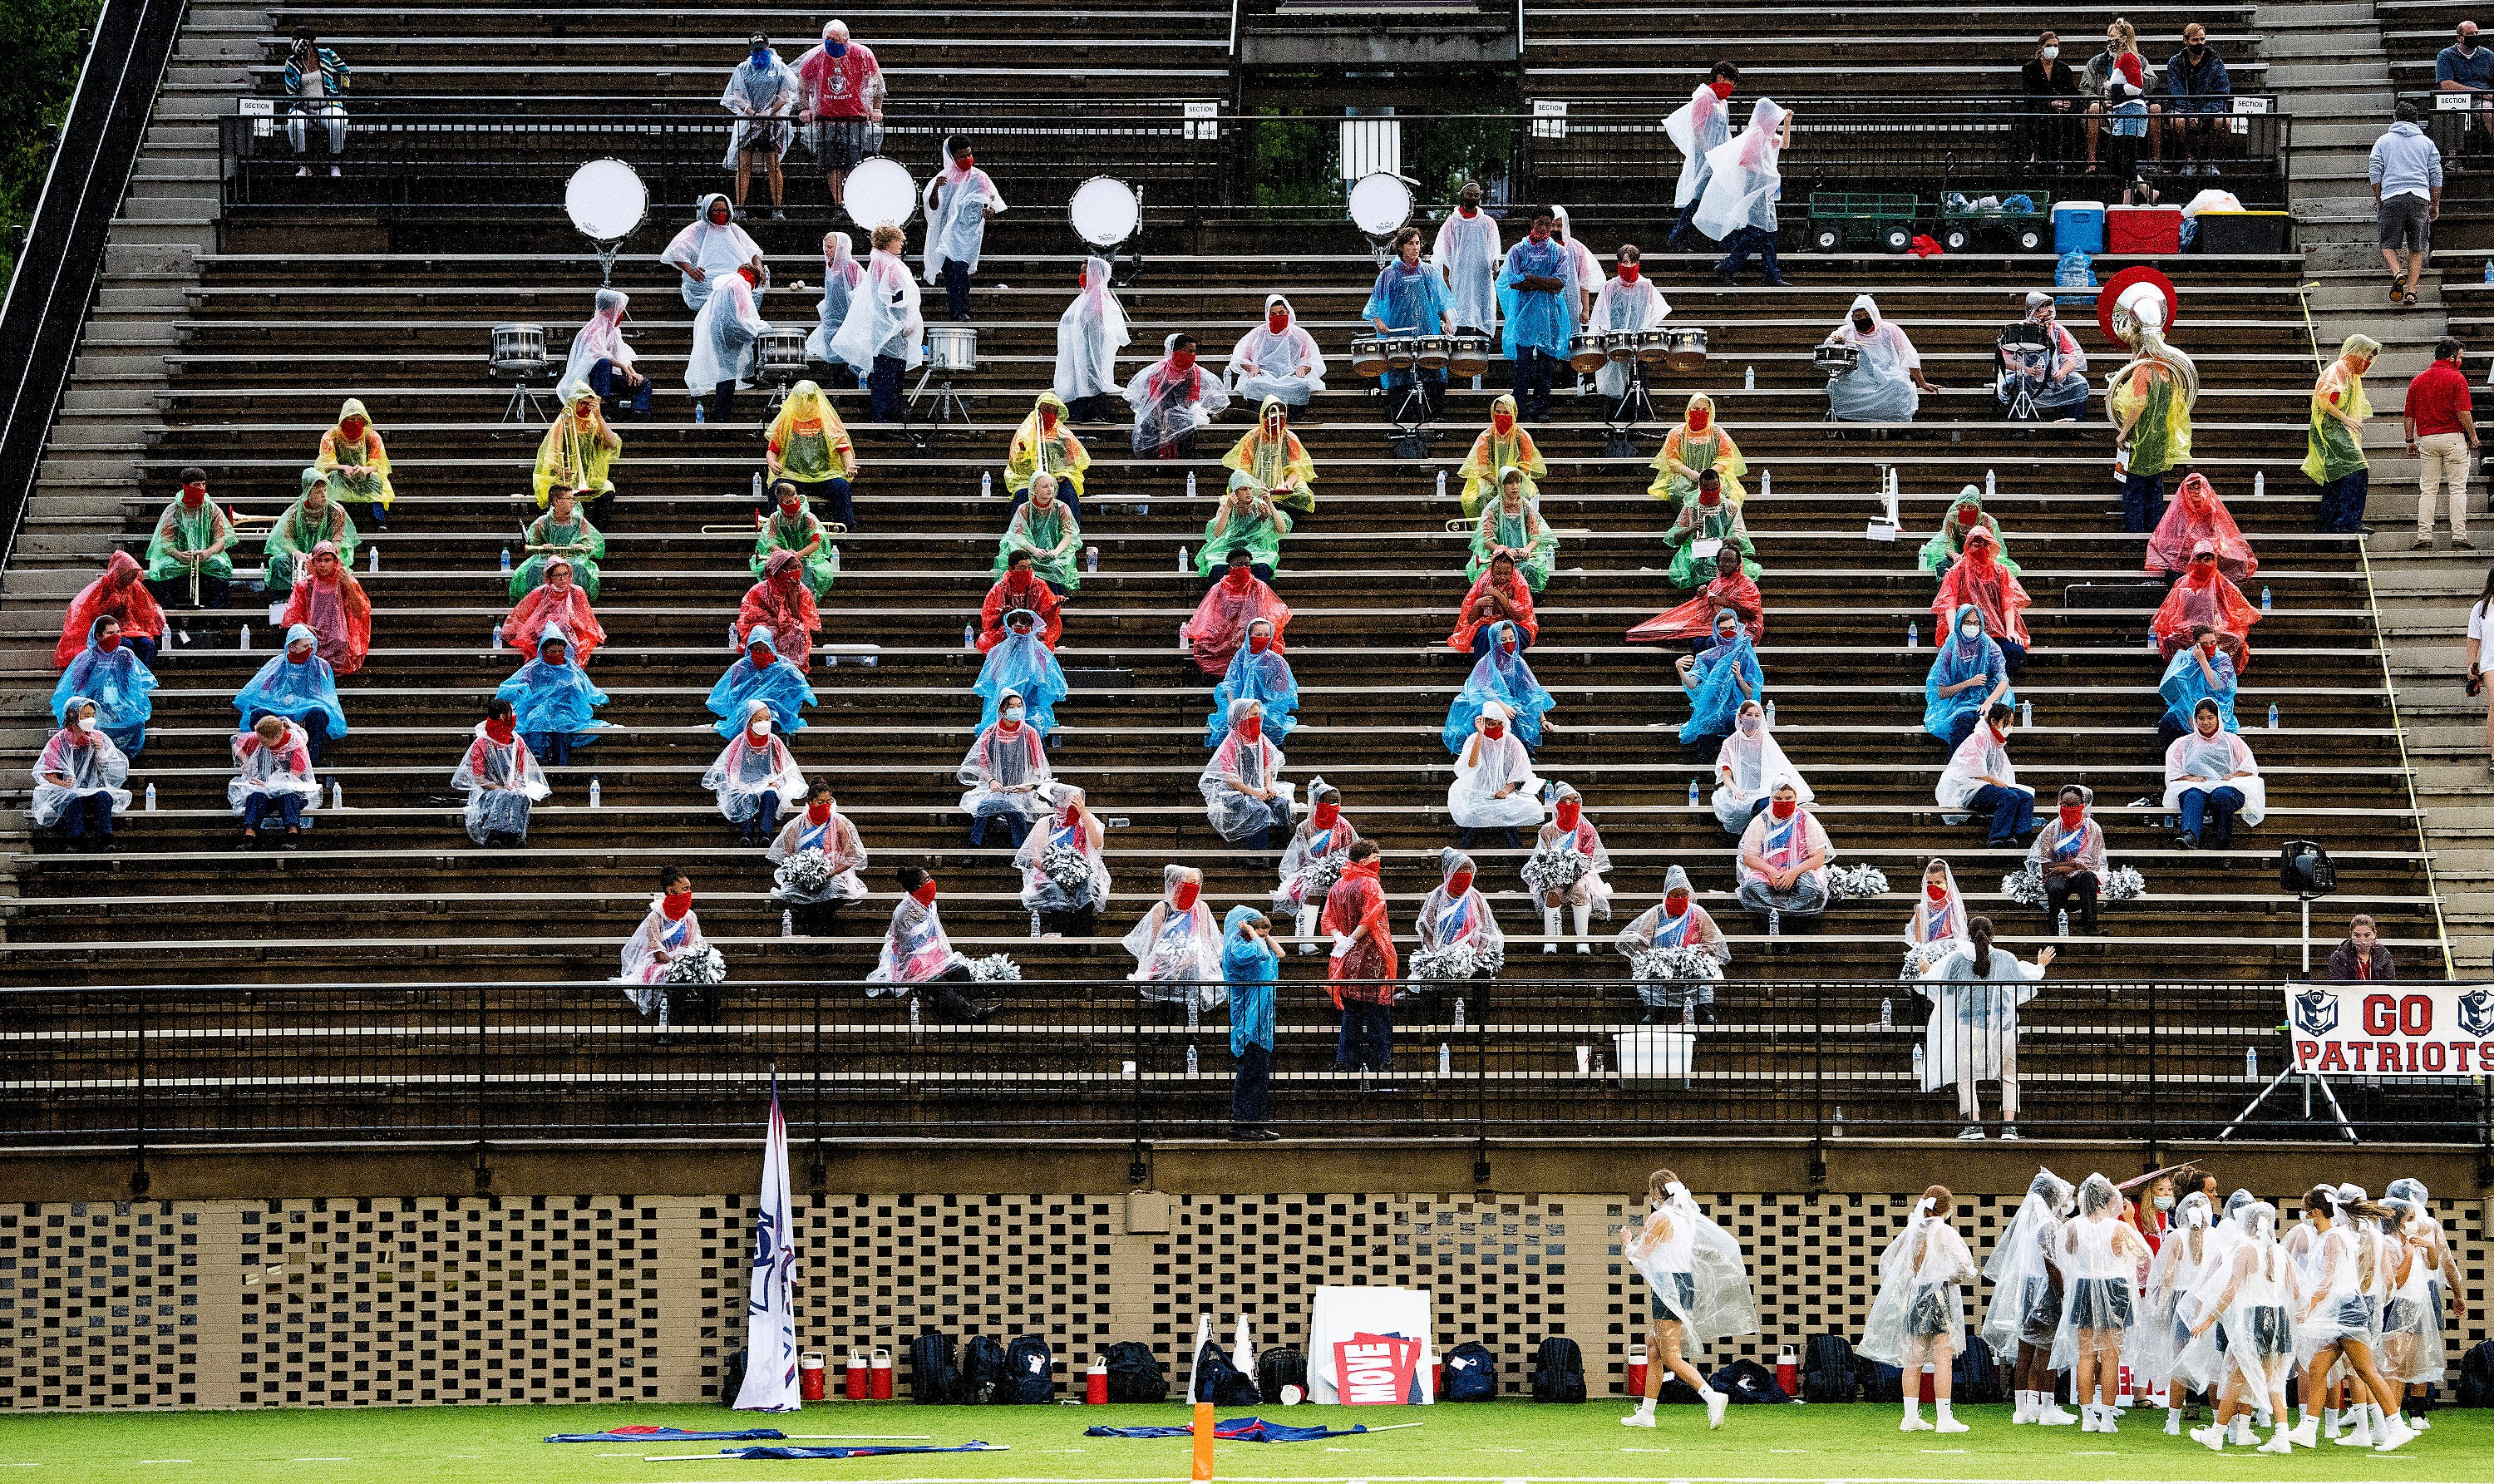 The Pike Road High School band keeps social distance before a game against Catholic High School in the AHSAA Kickoff Classic at Cramton Bowl in Montgomery, Ala., on Aug. 20.